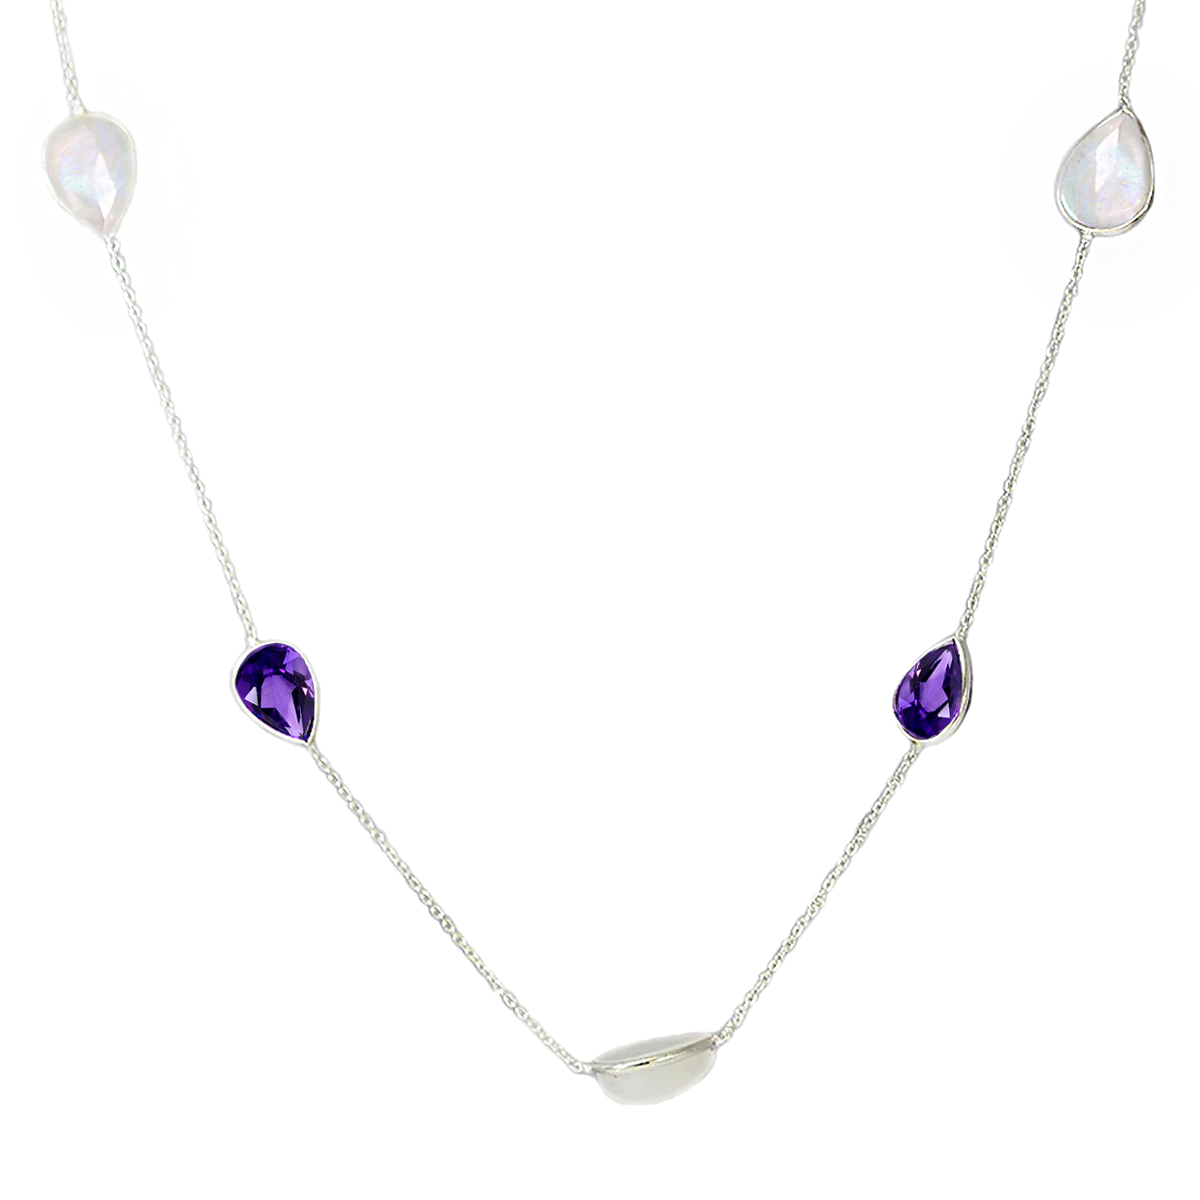 Beaded Amethyst and Moonstone Necklace